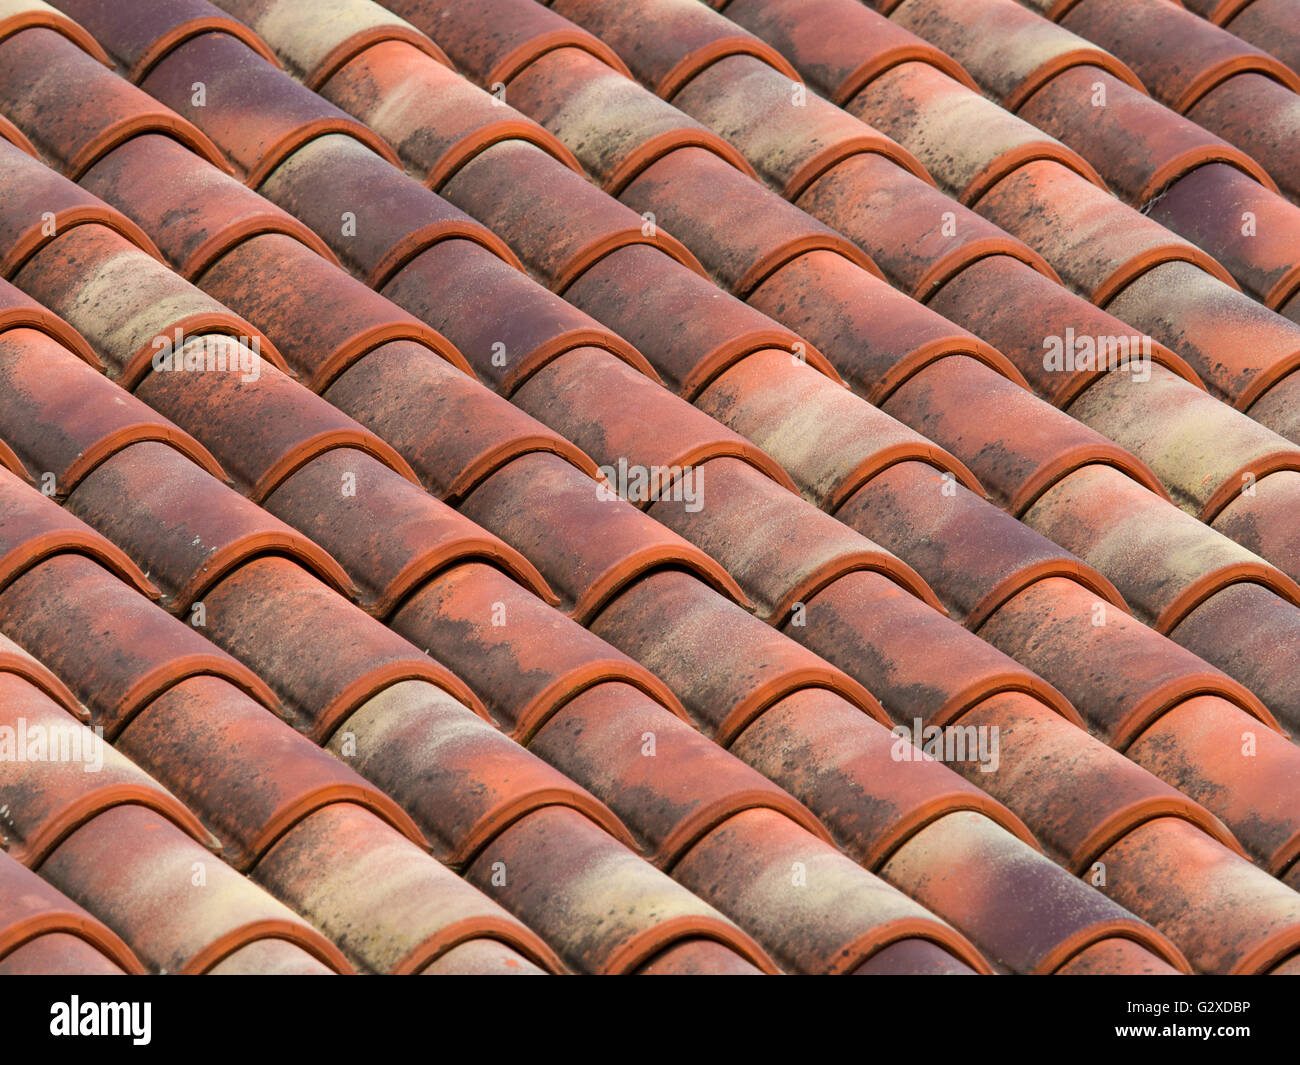 Terracotta Clay Roofing Tiles Stock Photos Terracotta Clay